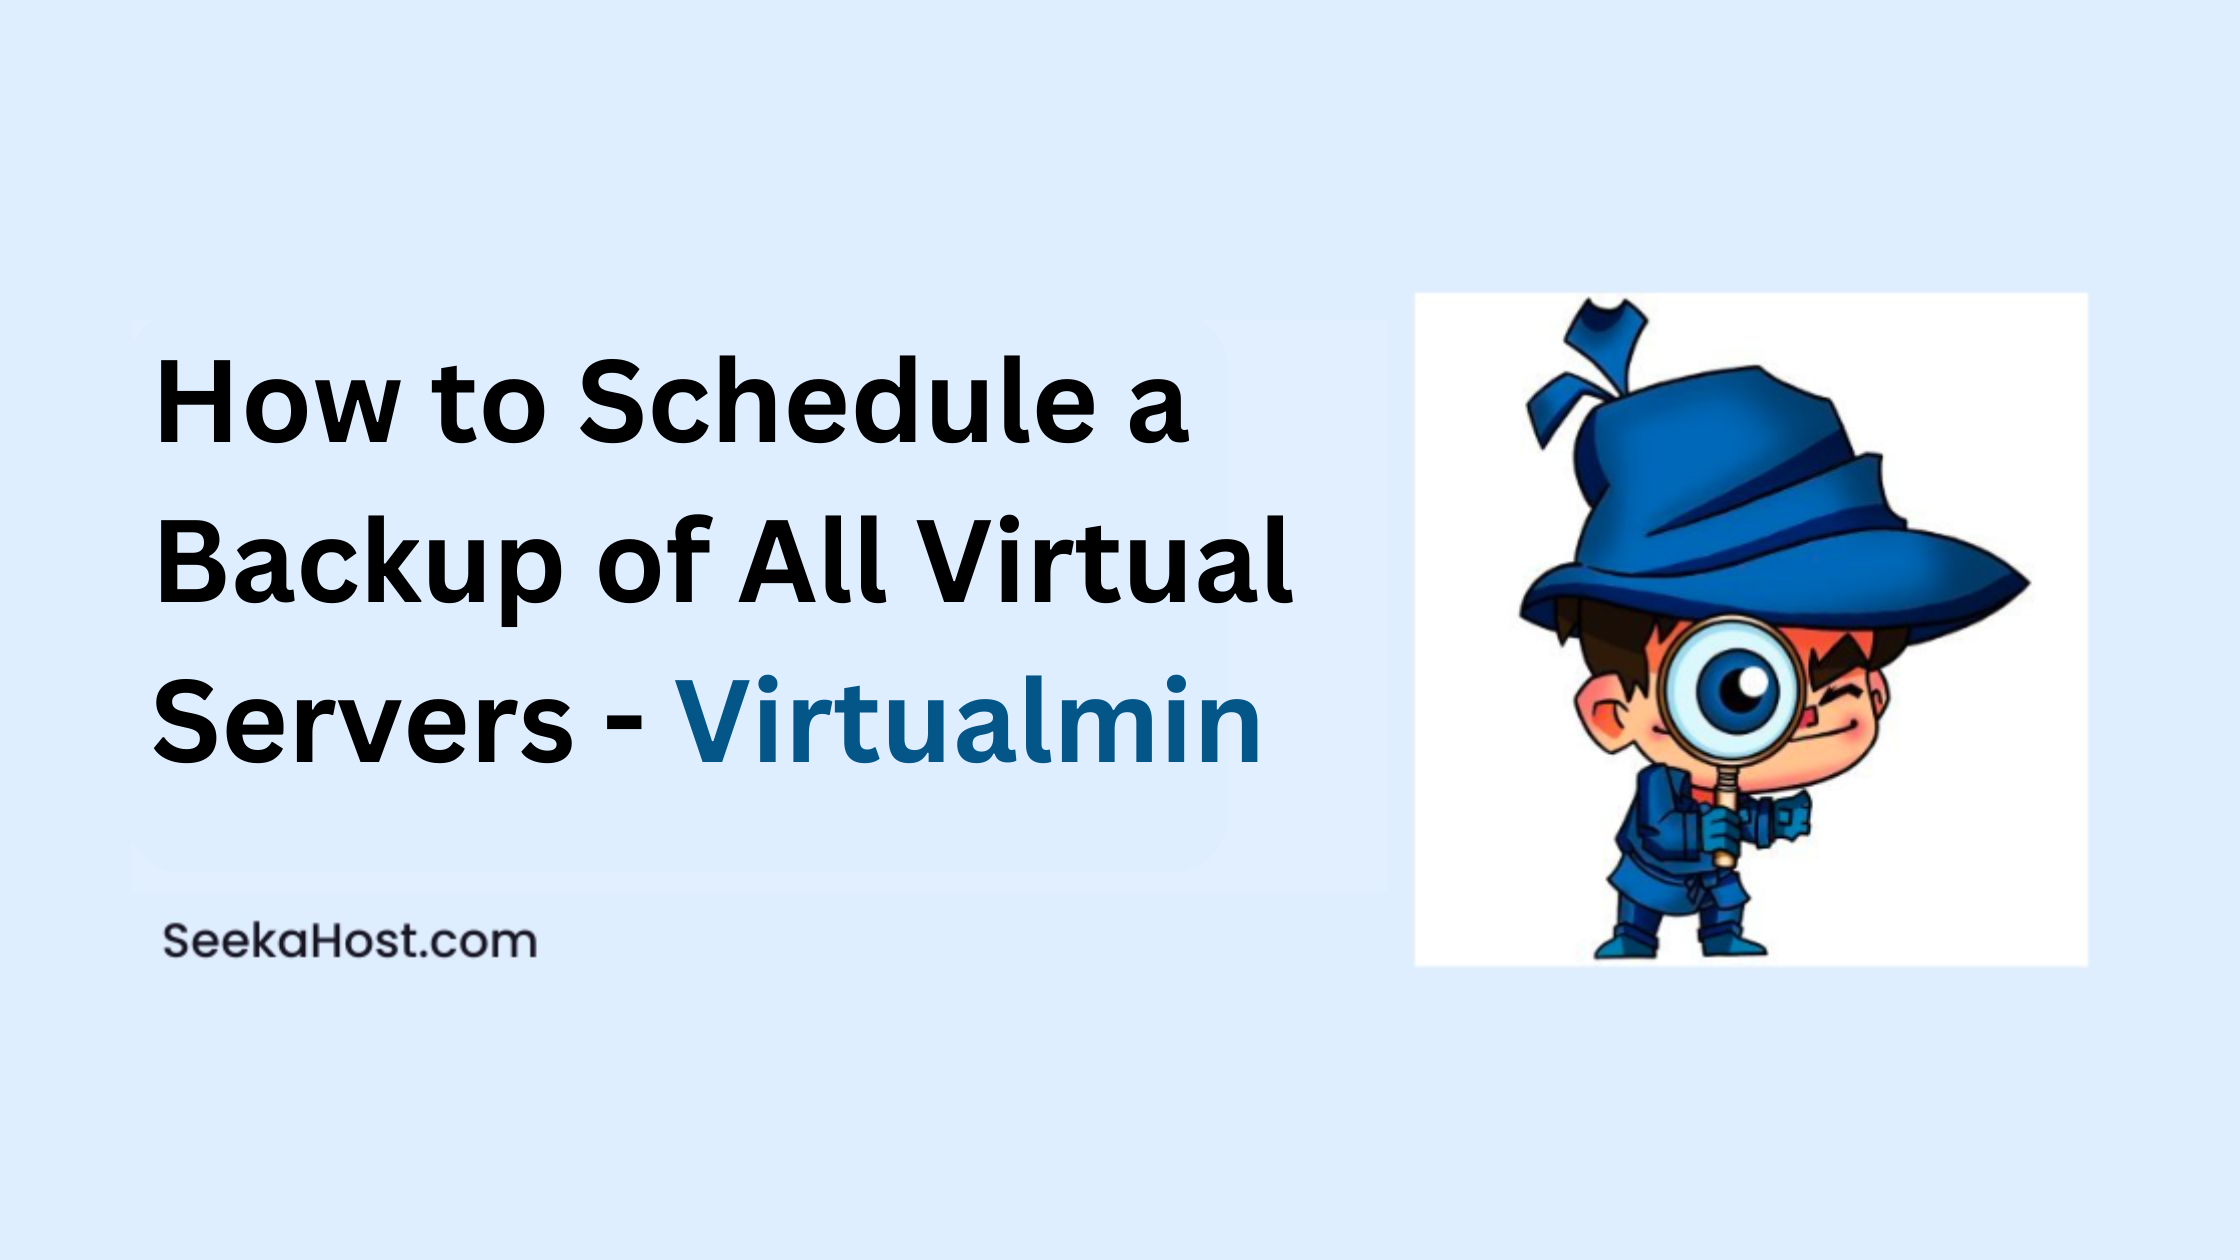 How to Schedule a Backup of All Virtual Servers